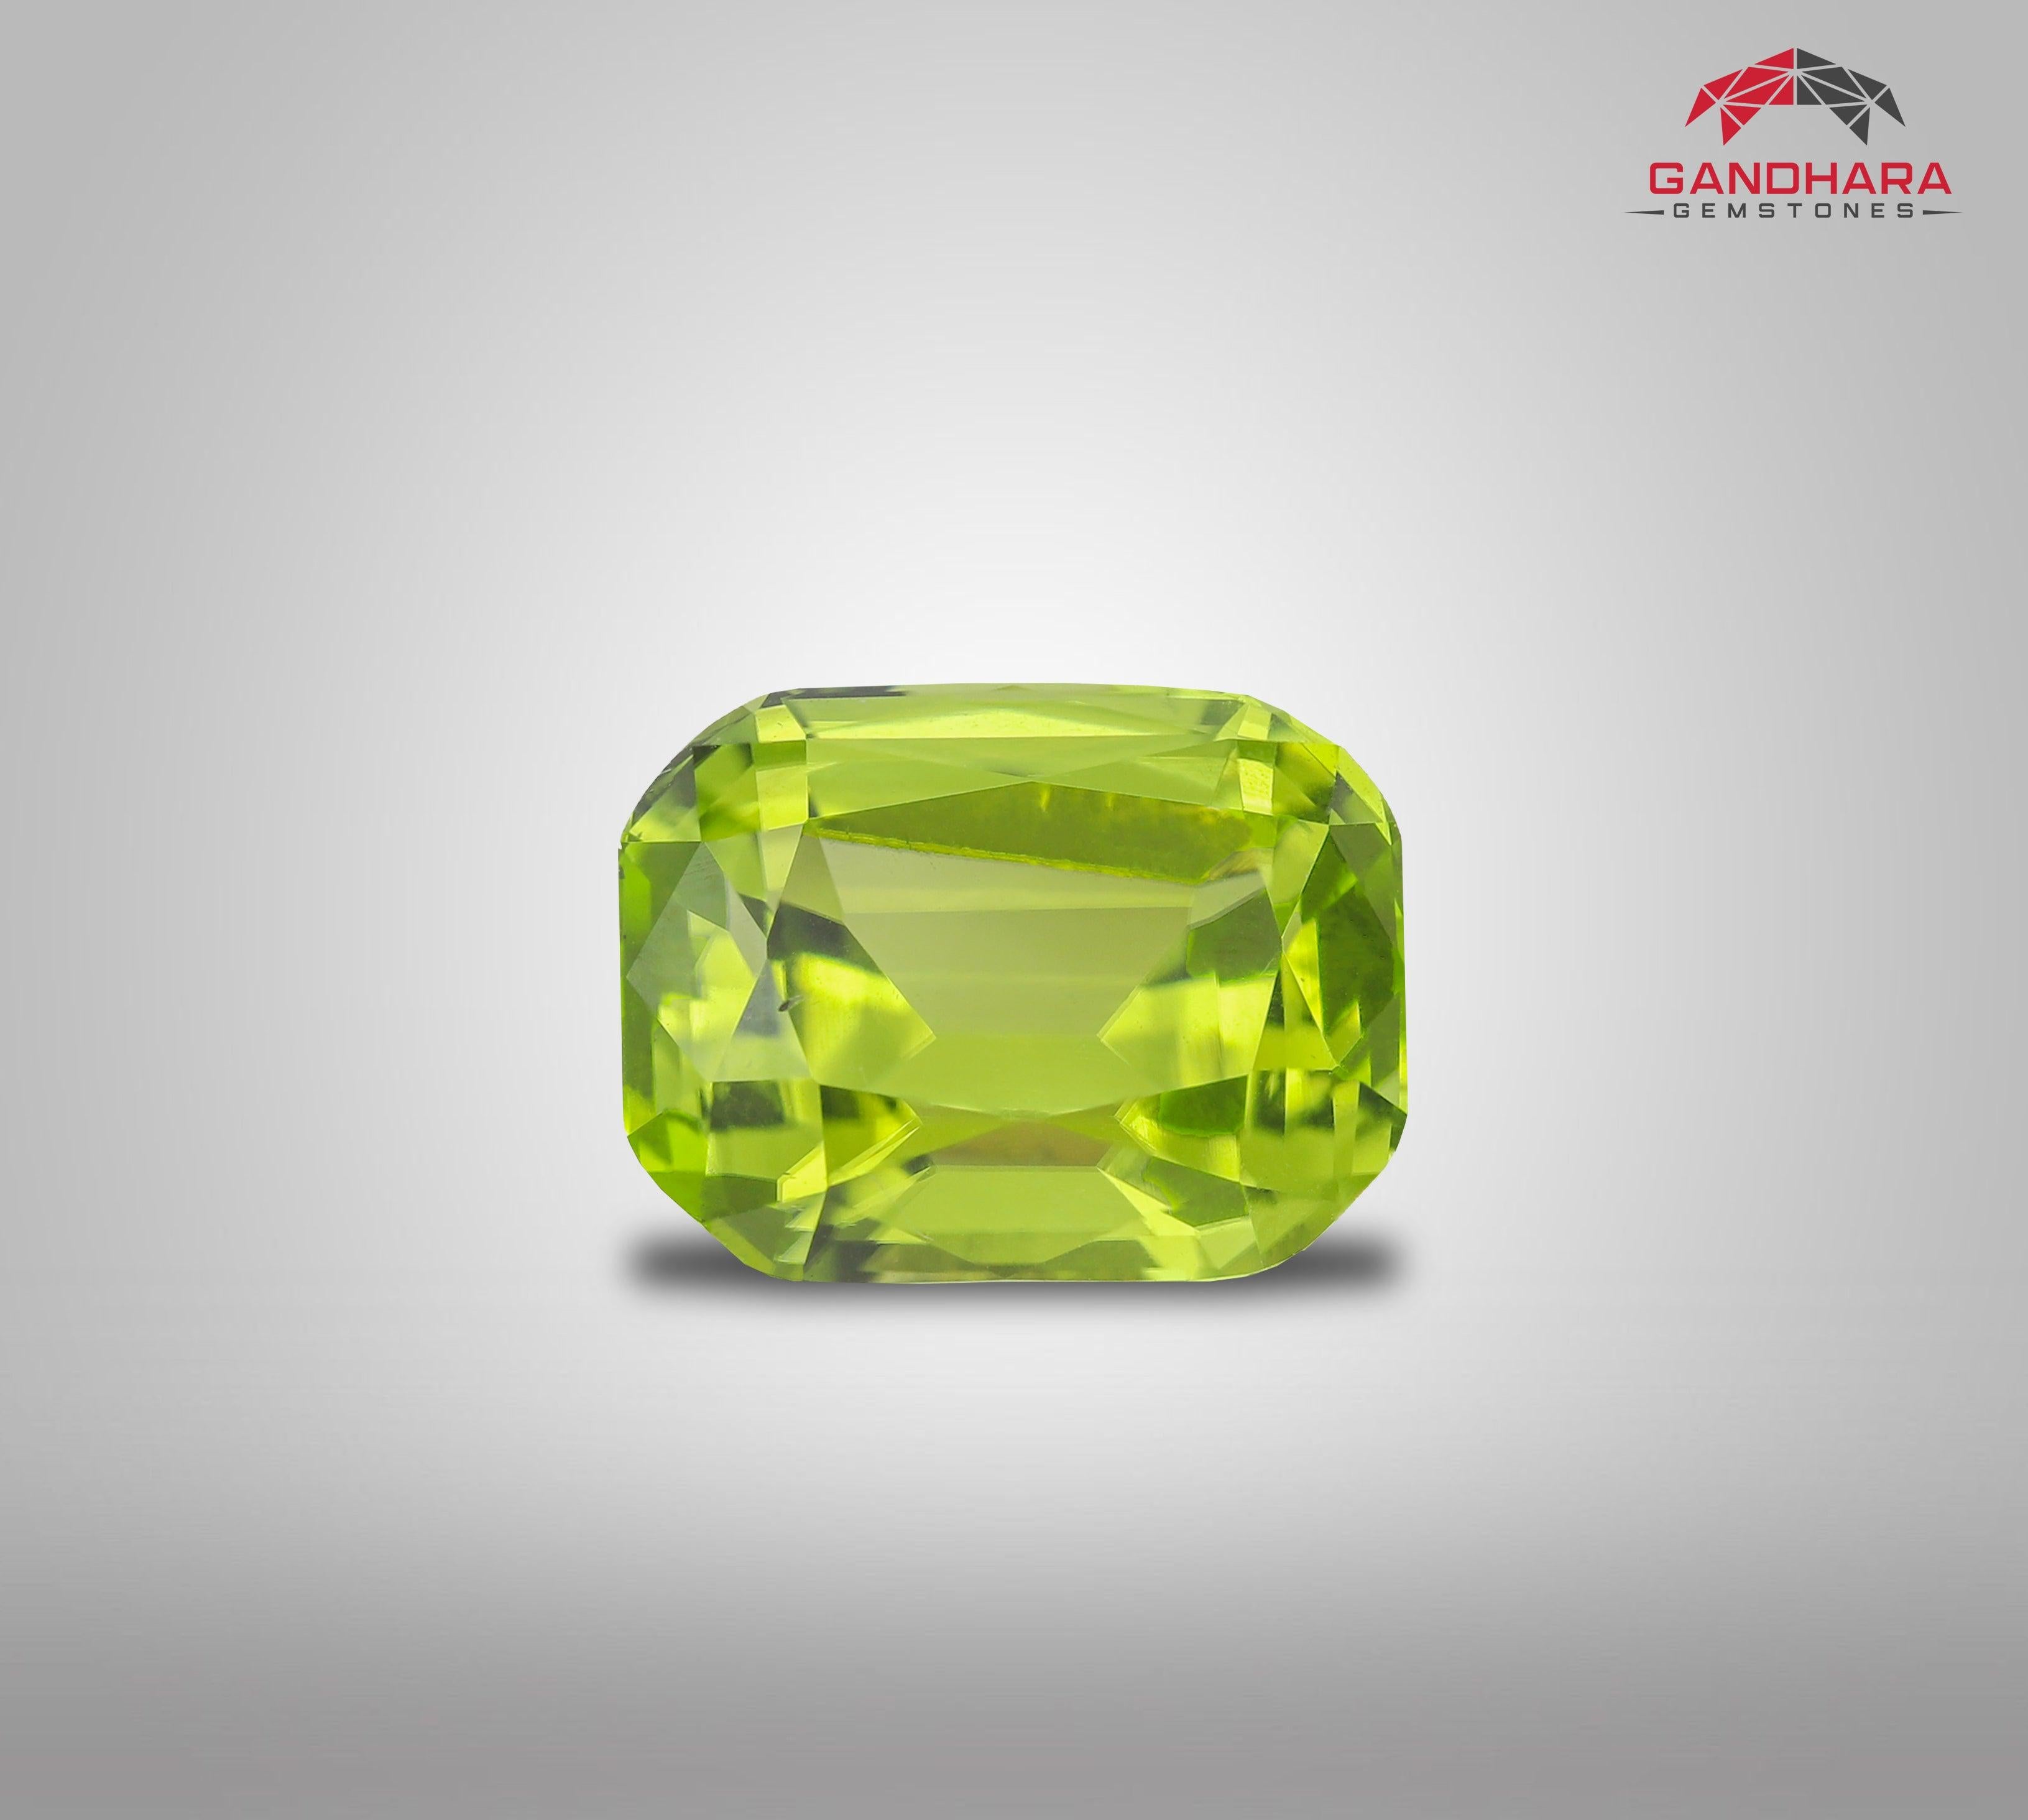 Green Natural Loose Peridot Stone, available for sale at whole sale price natural high quality, Flawless vvs 3.37 carats certified peridot gemstone from Pakistan.

Product Information:
GEMSTONE TYPE	Green Natural Loose Peridot Stone
WEIGHT	3.37